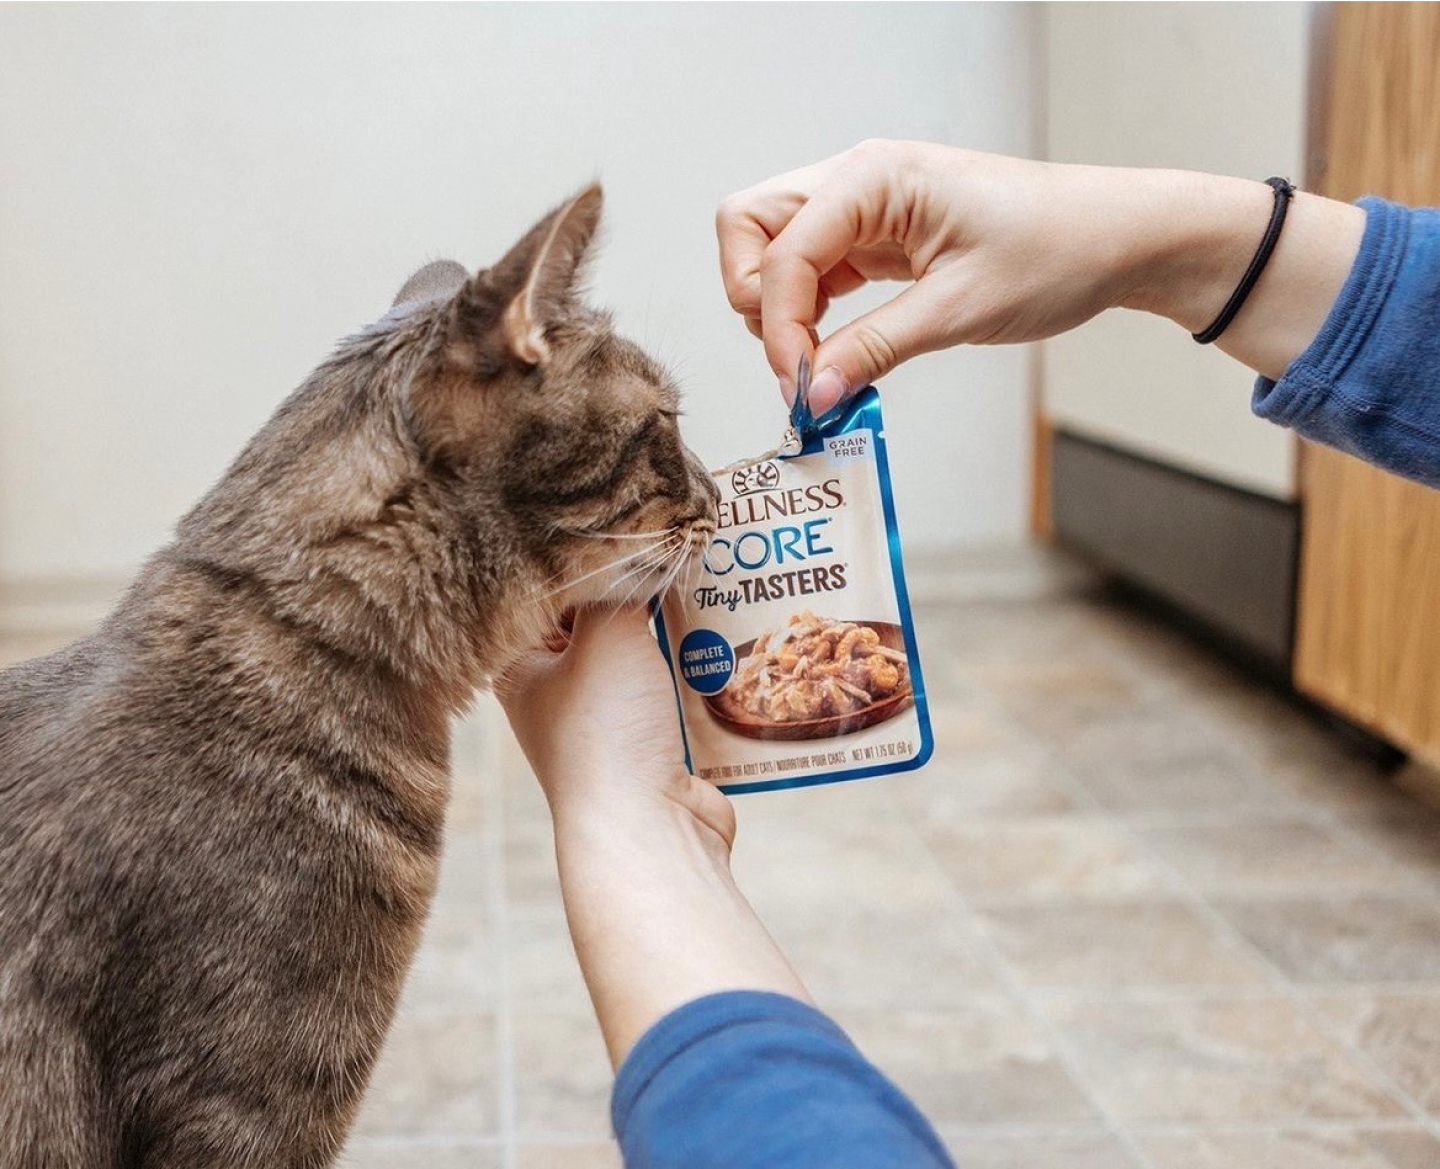 Wellness®️ dry cat food is crafted with high-quality ingredients scientifically proven to support the 5 Signs of Wellbeing.